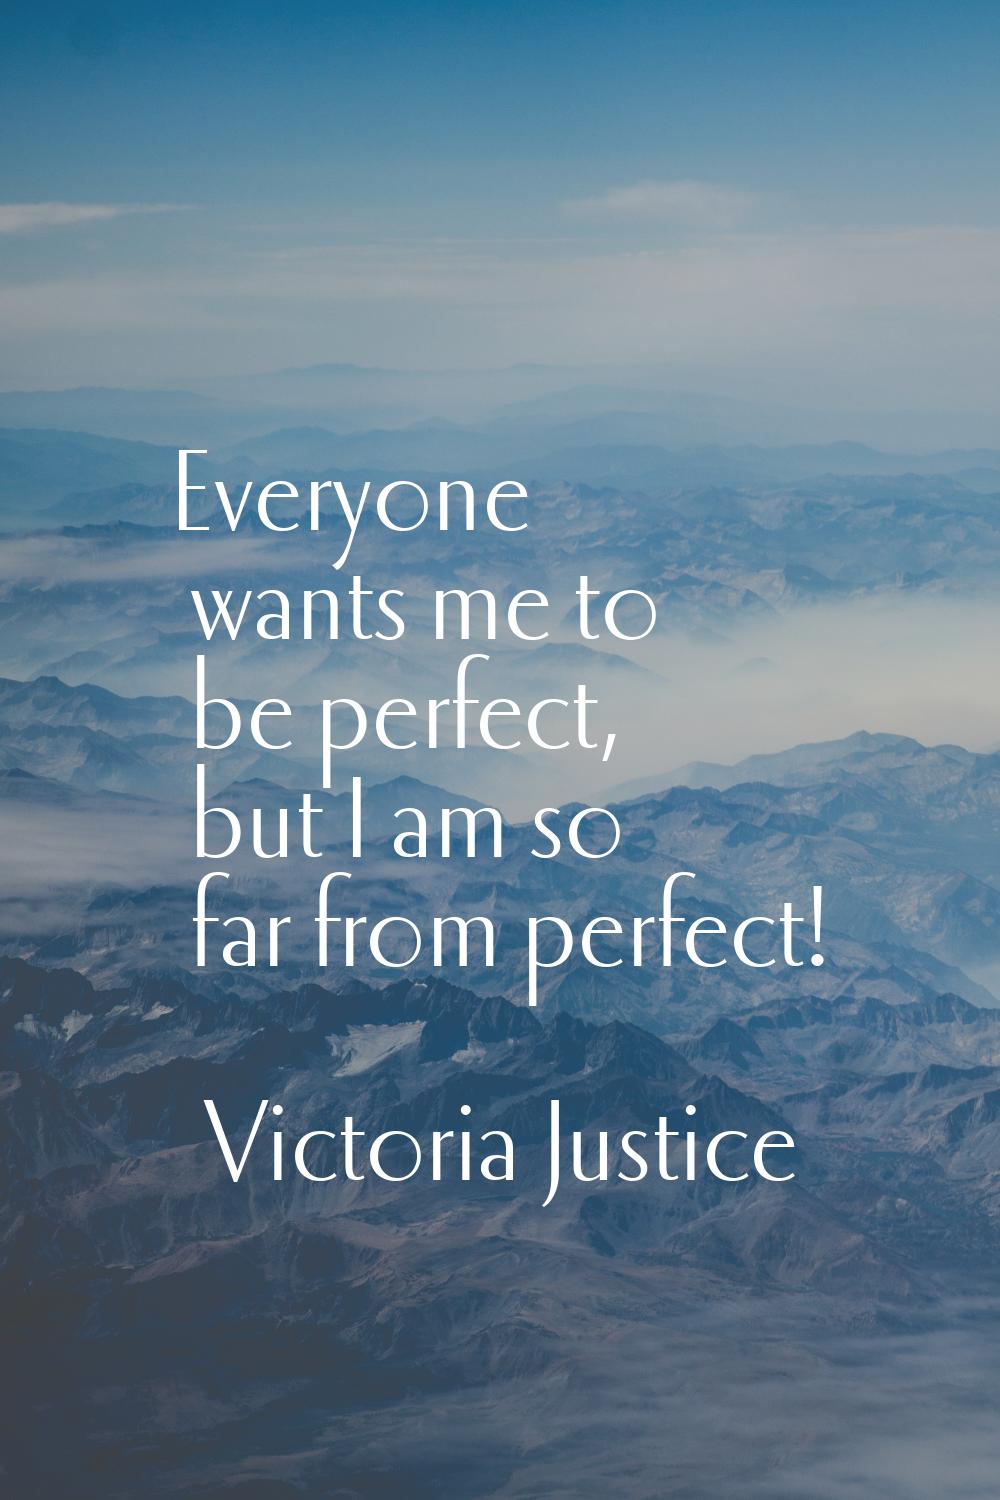 Everyone wants me to be perfect, but I am so far from perfect!